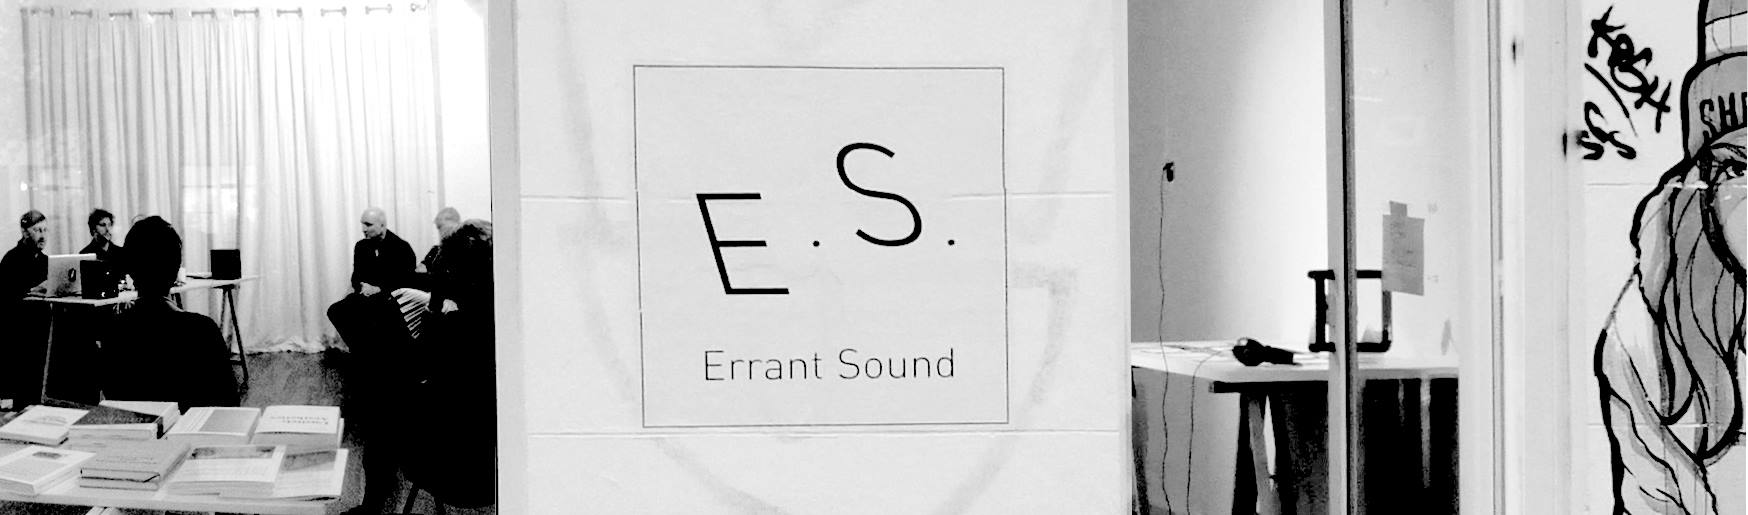 👁 Exhibition opening at Errant Sound with “inside an inside forest”